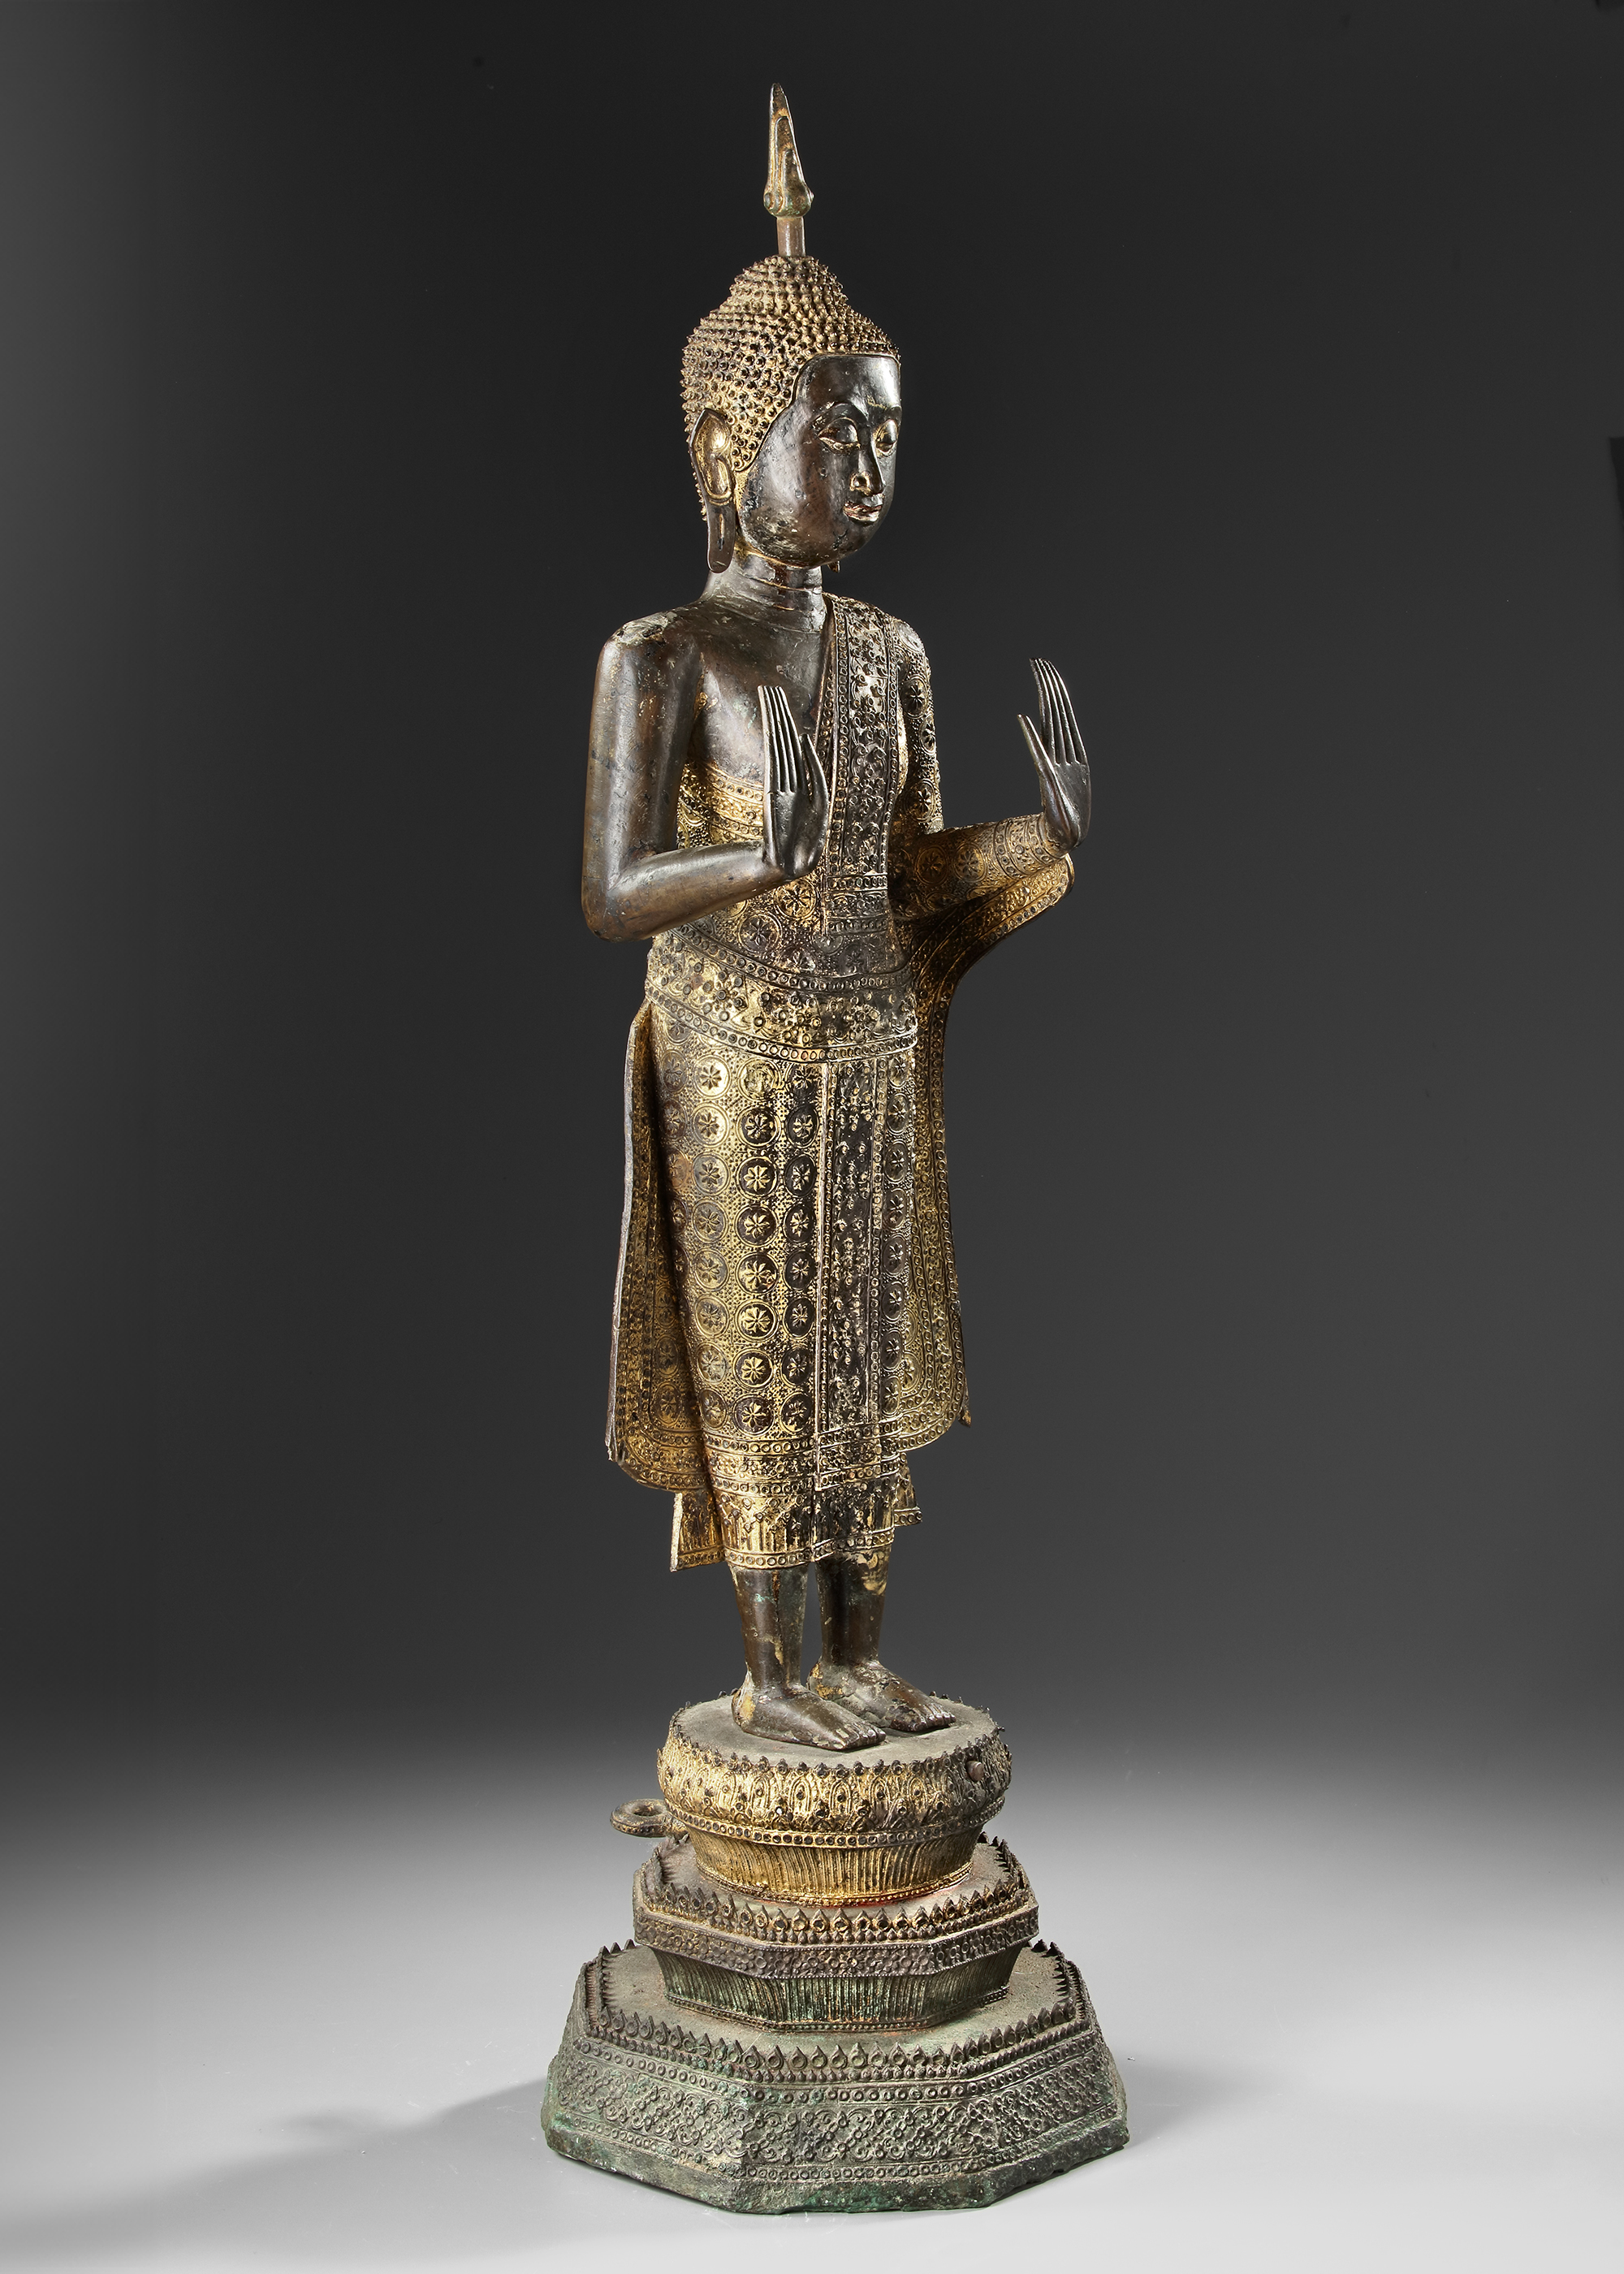 A GILT BRONZE STANDING FIGURE OF A BUDDHA, LATE 19TH CENTURY - Image 5 of 5